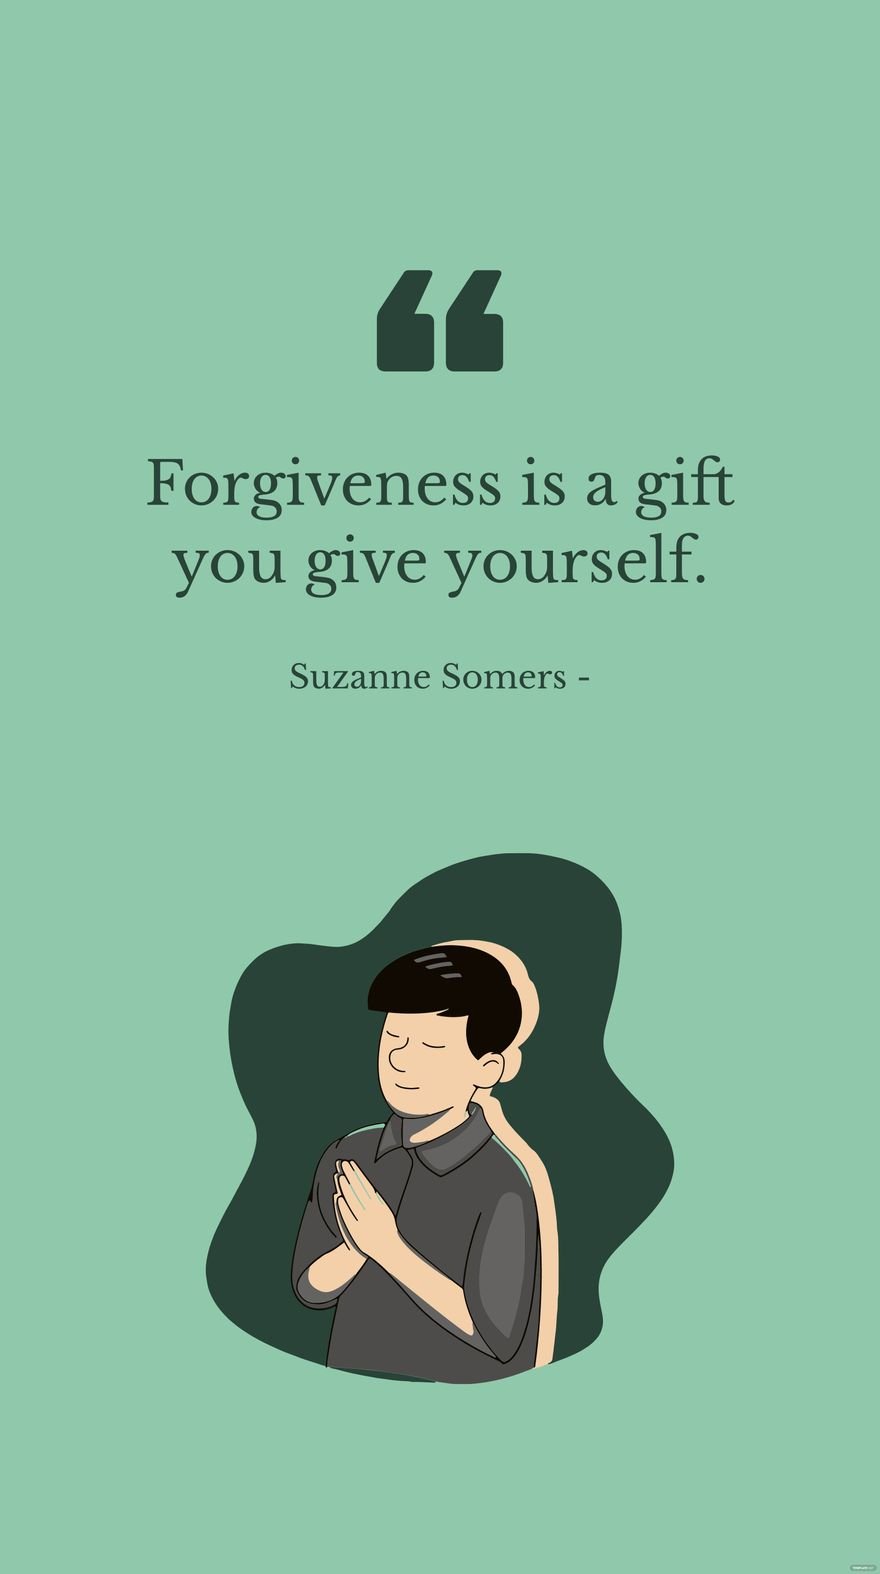 Suzanne Somers - Forgiveness is a gift you give yourself.